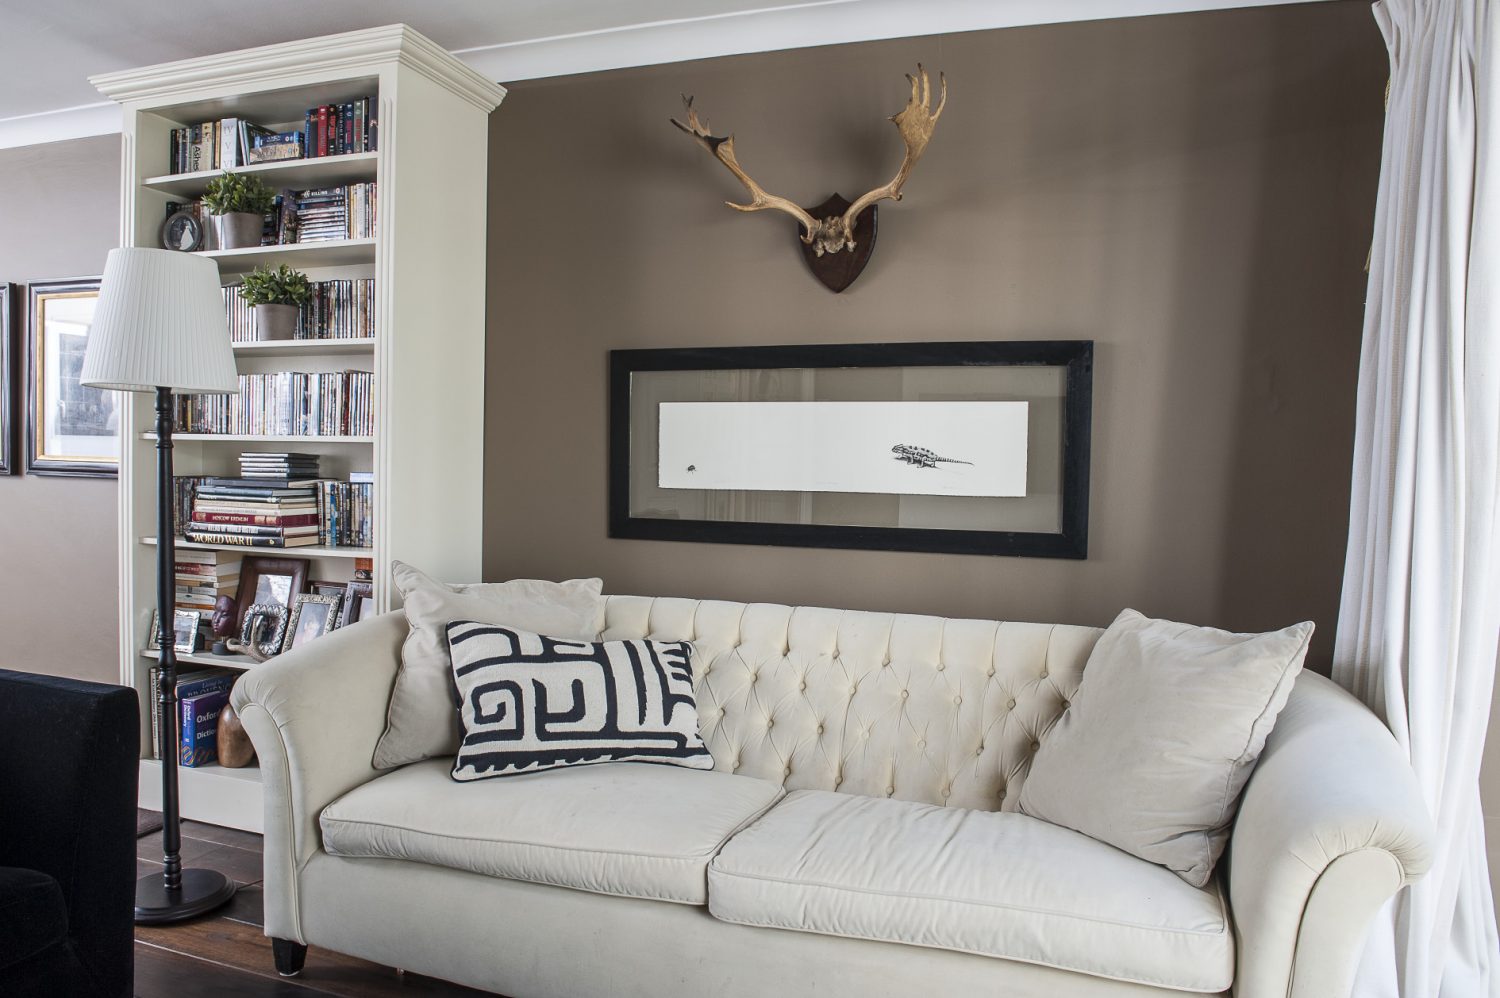 In the children’s room sofas – one stone, the other black – lounge around a huge TV. On the wall opposite is a pair of antlers and a great wildlife print by one of the couple’s favourite artists, South African John Moore